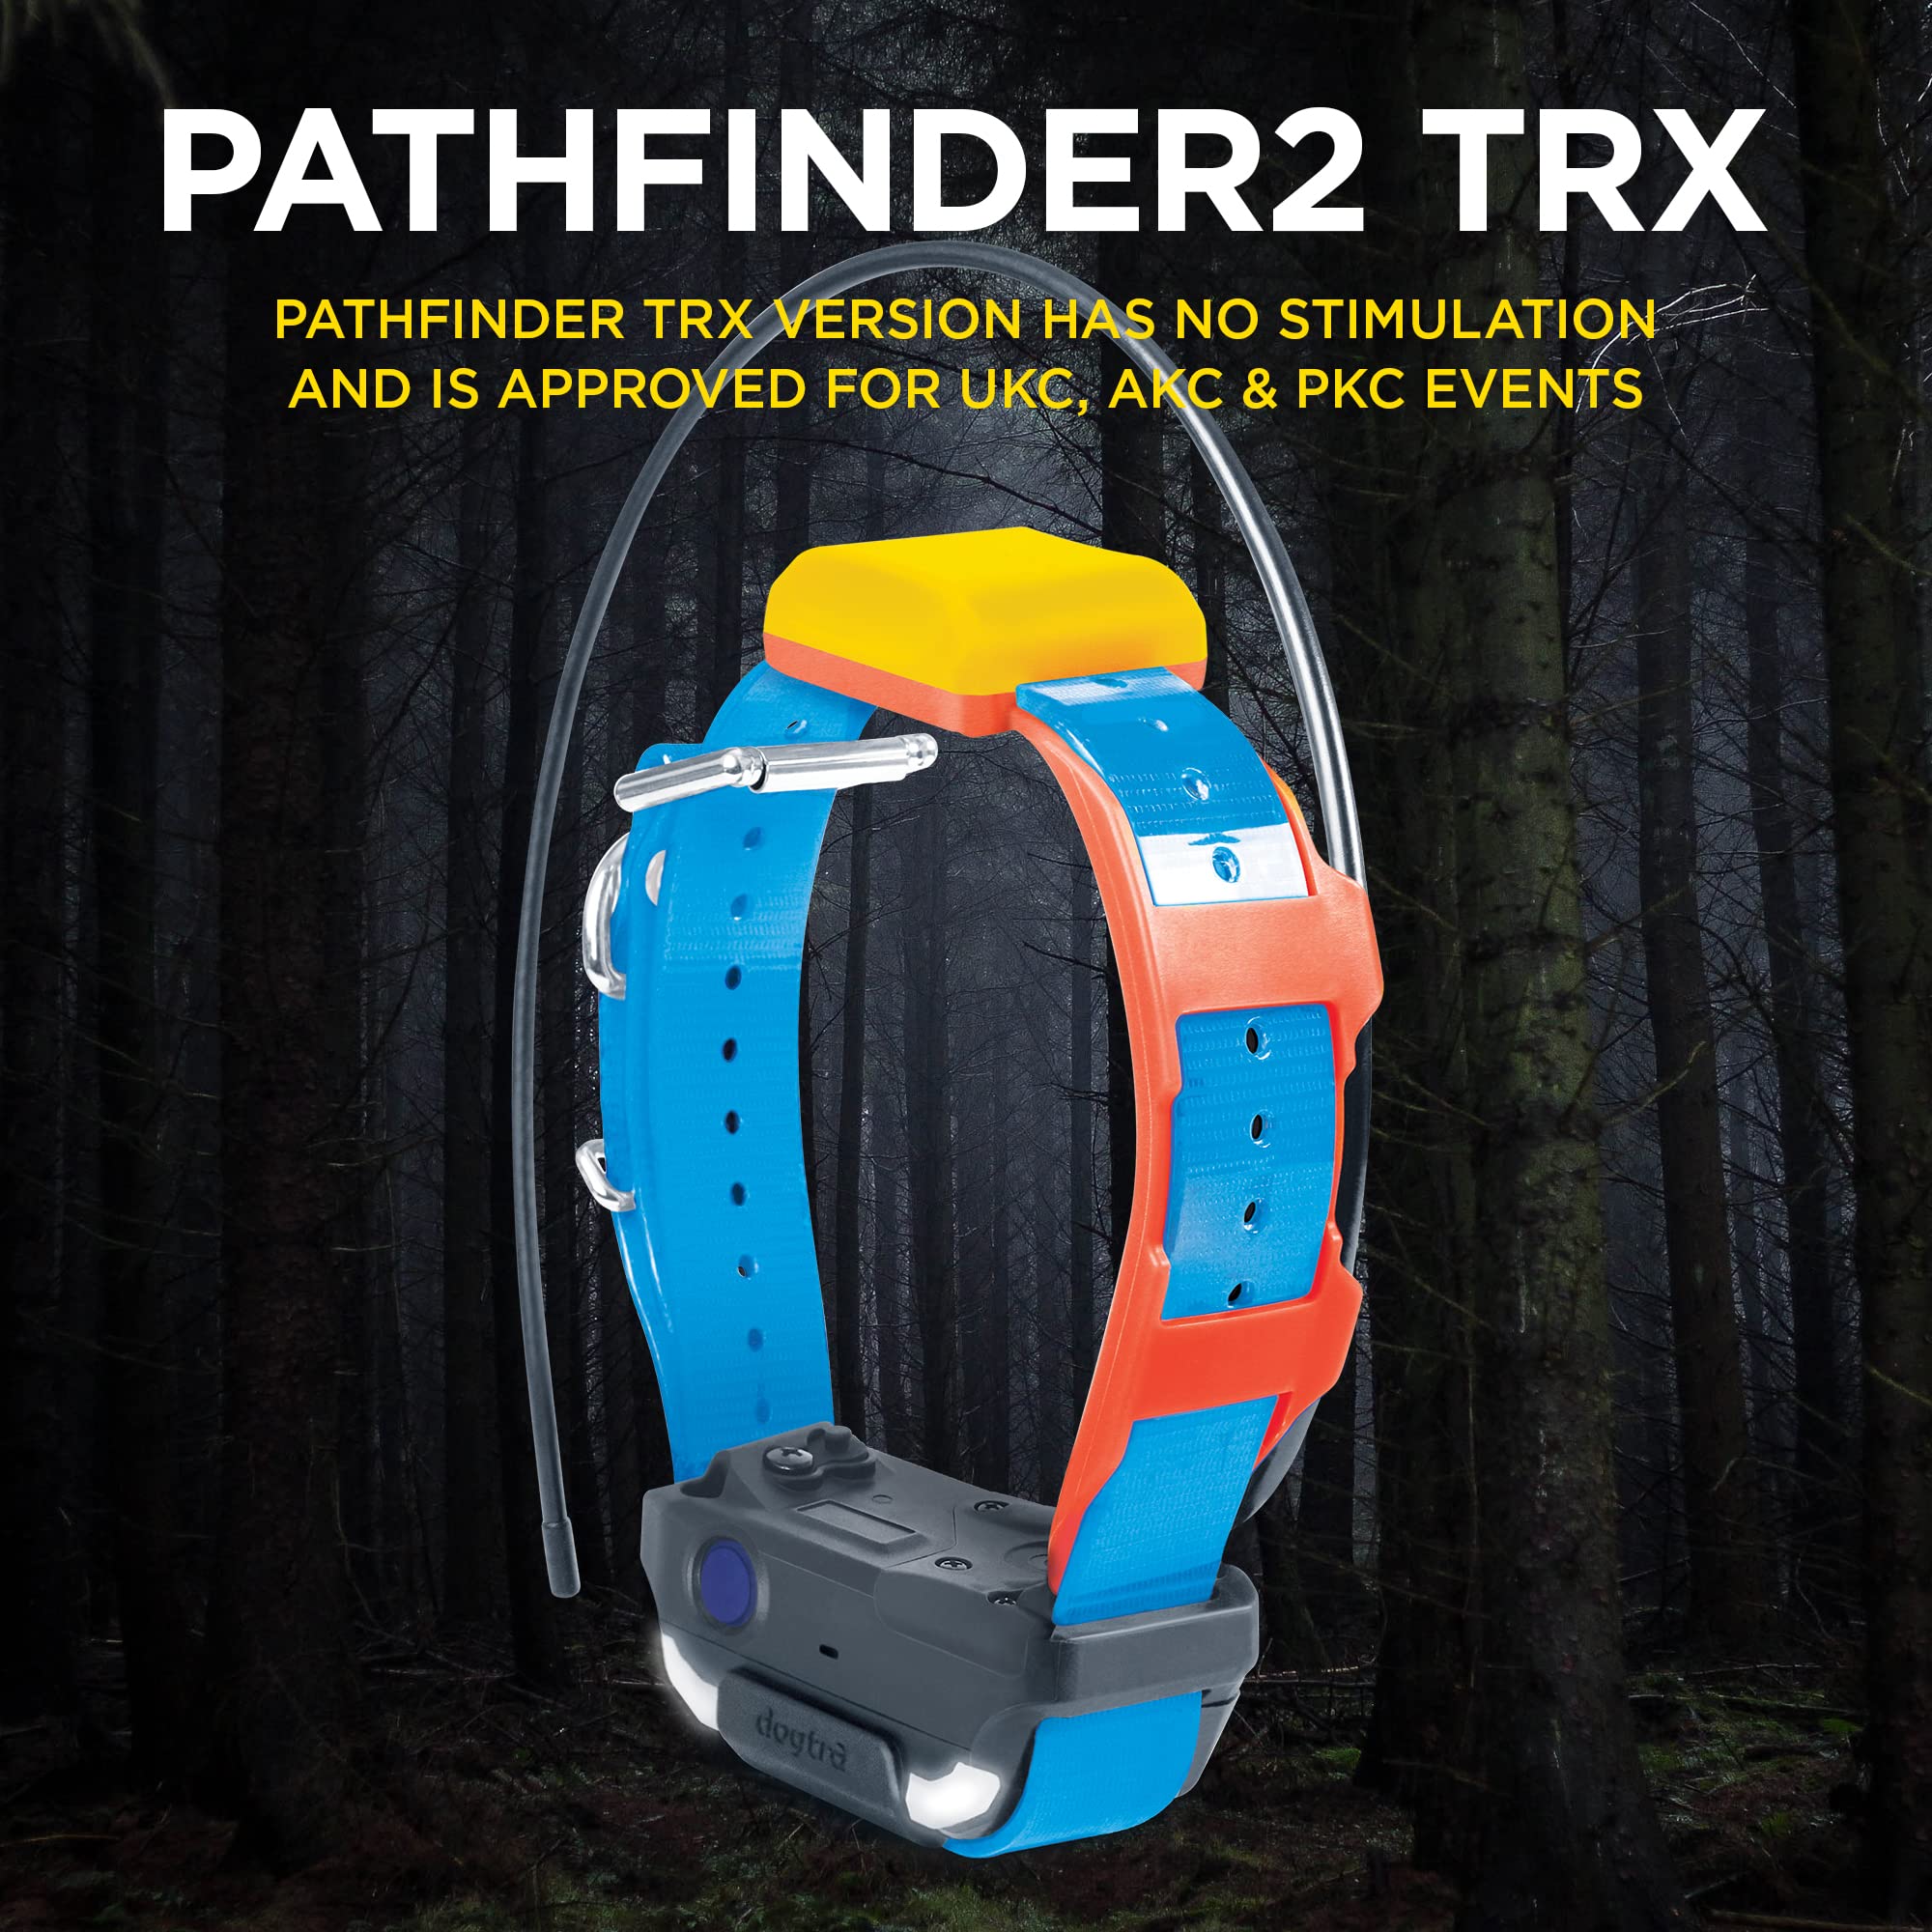 Dogtra Pathfinder 2 TRX Additional Receiver Dog GPS Tracker LED Light Orange Collar SmartWatch Compatible Rechargeable Waterproof Free Offline Maps No Subscription No Monthly Fee Smartphone Required